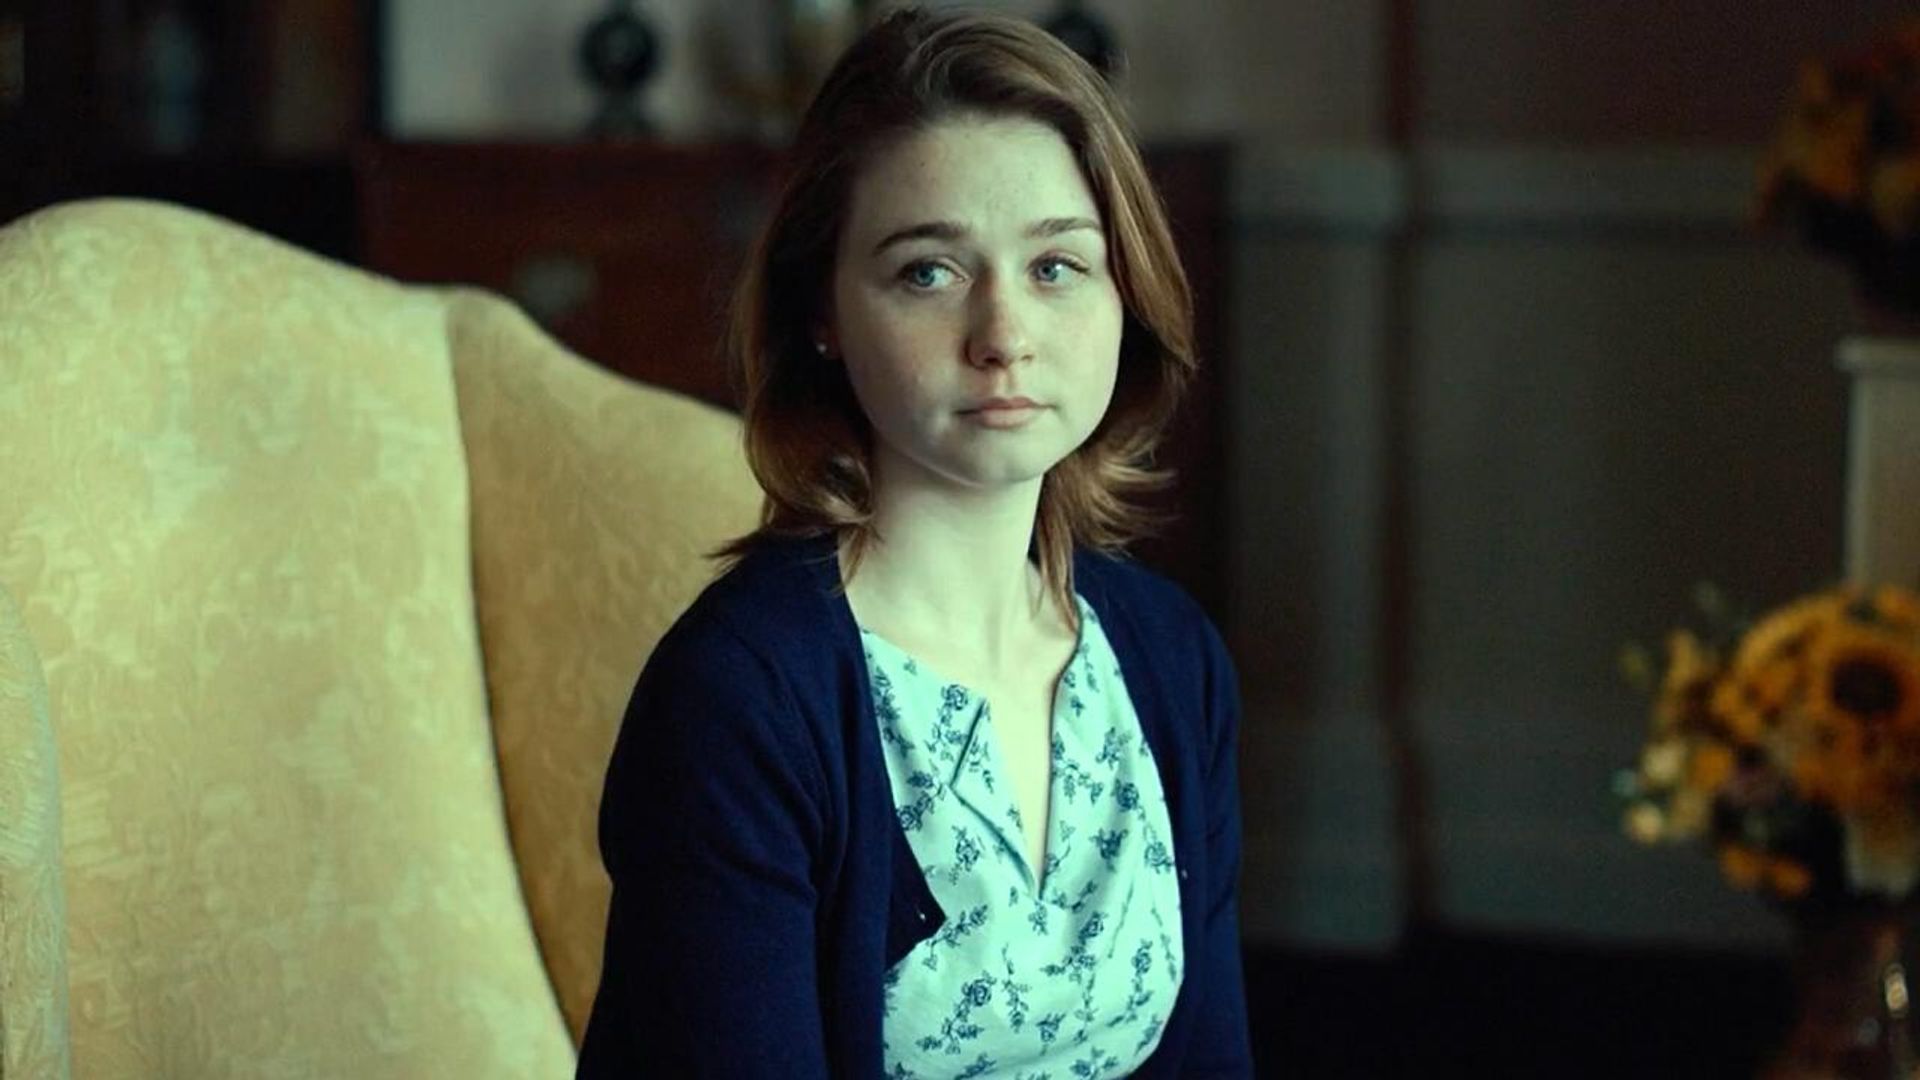 Jessica Barden in 'The Lobster'